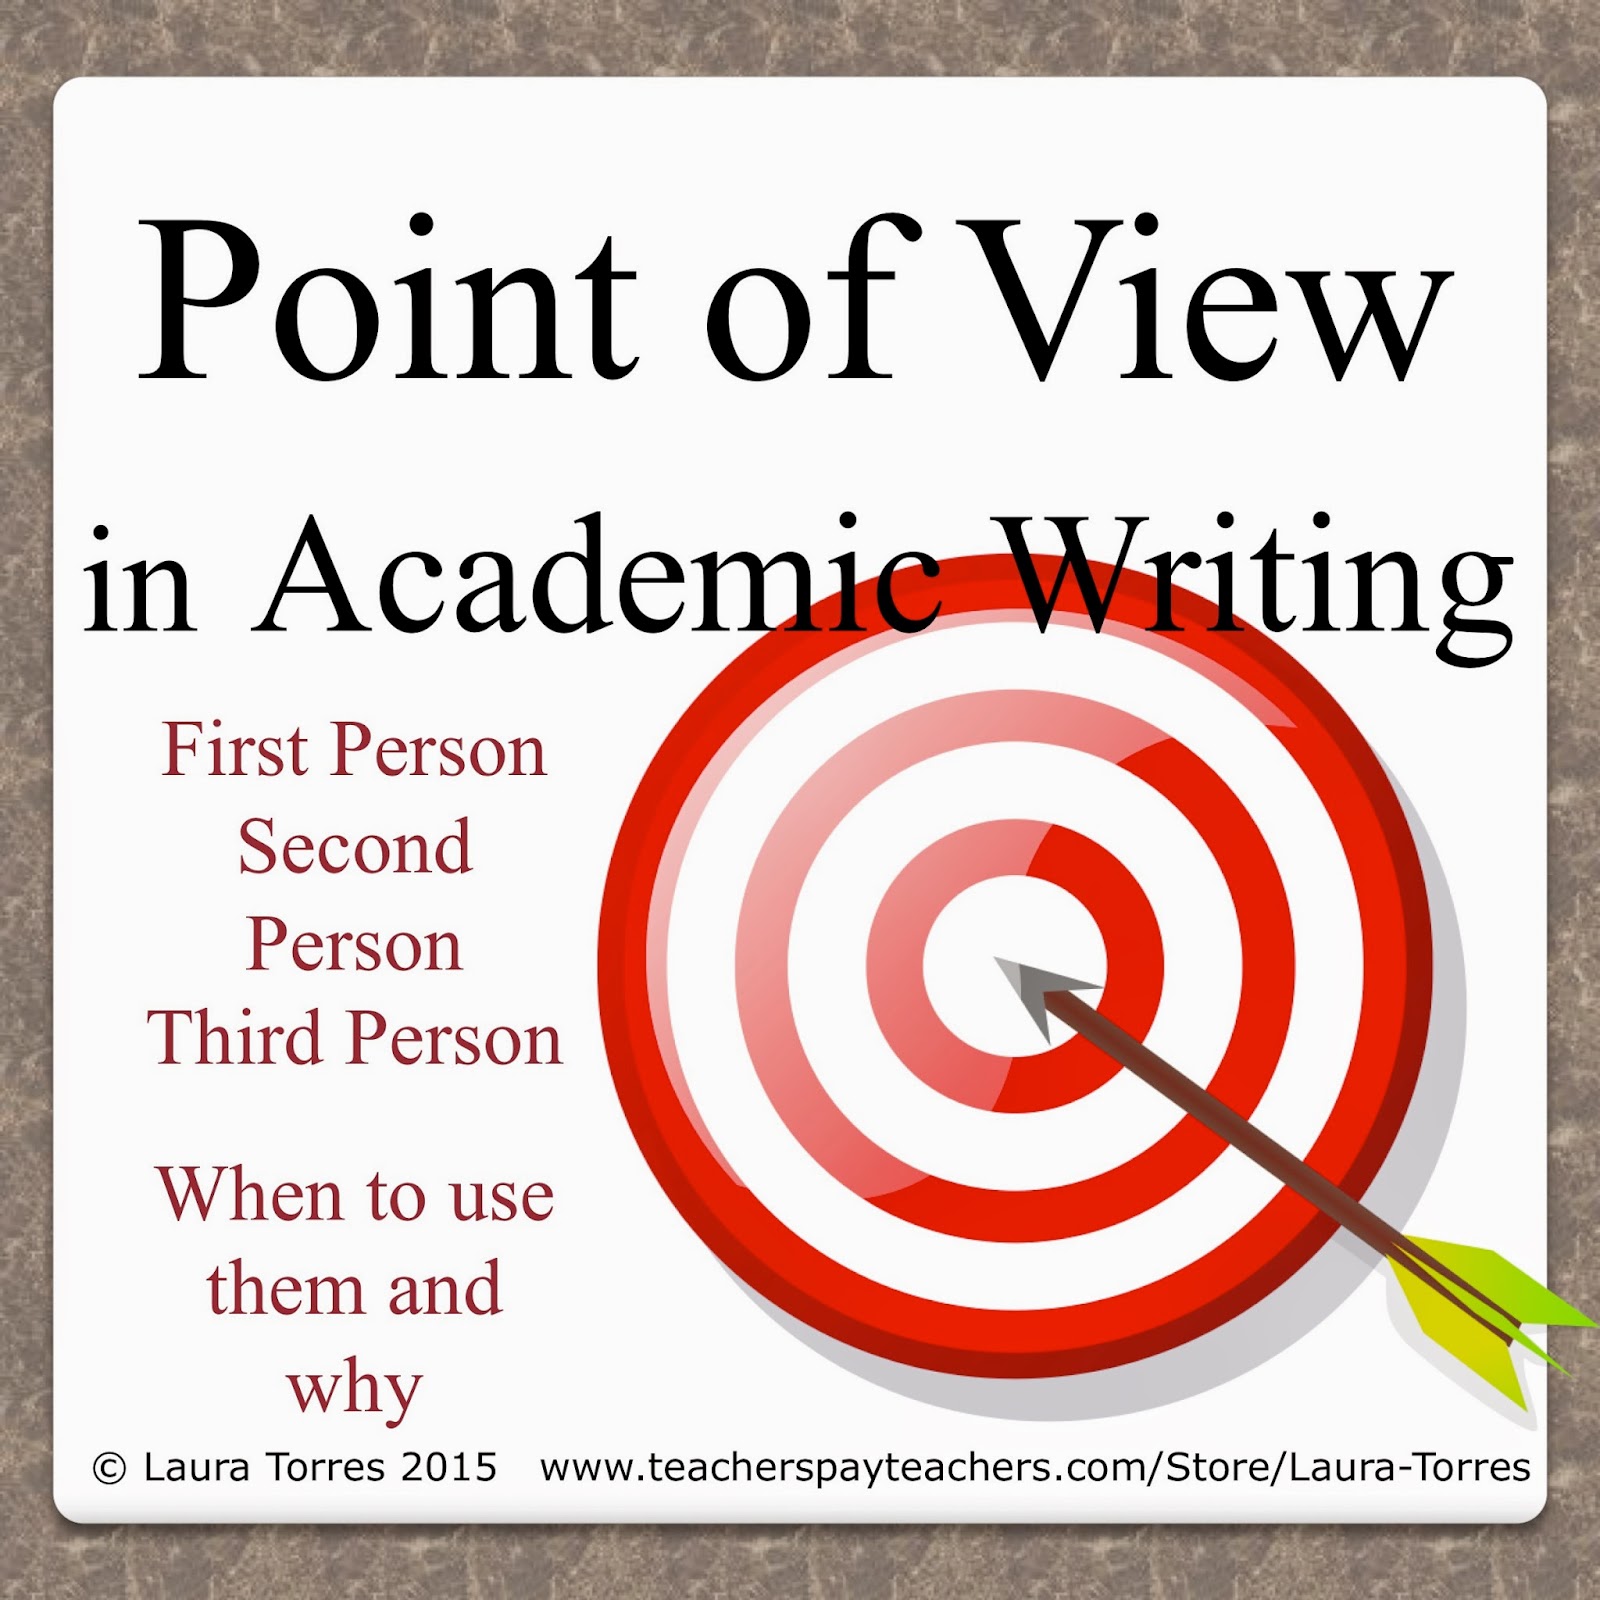 https://www.teacherspayteachers.com/Product/Point-of-View-in-Academic-Writing-1798737